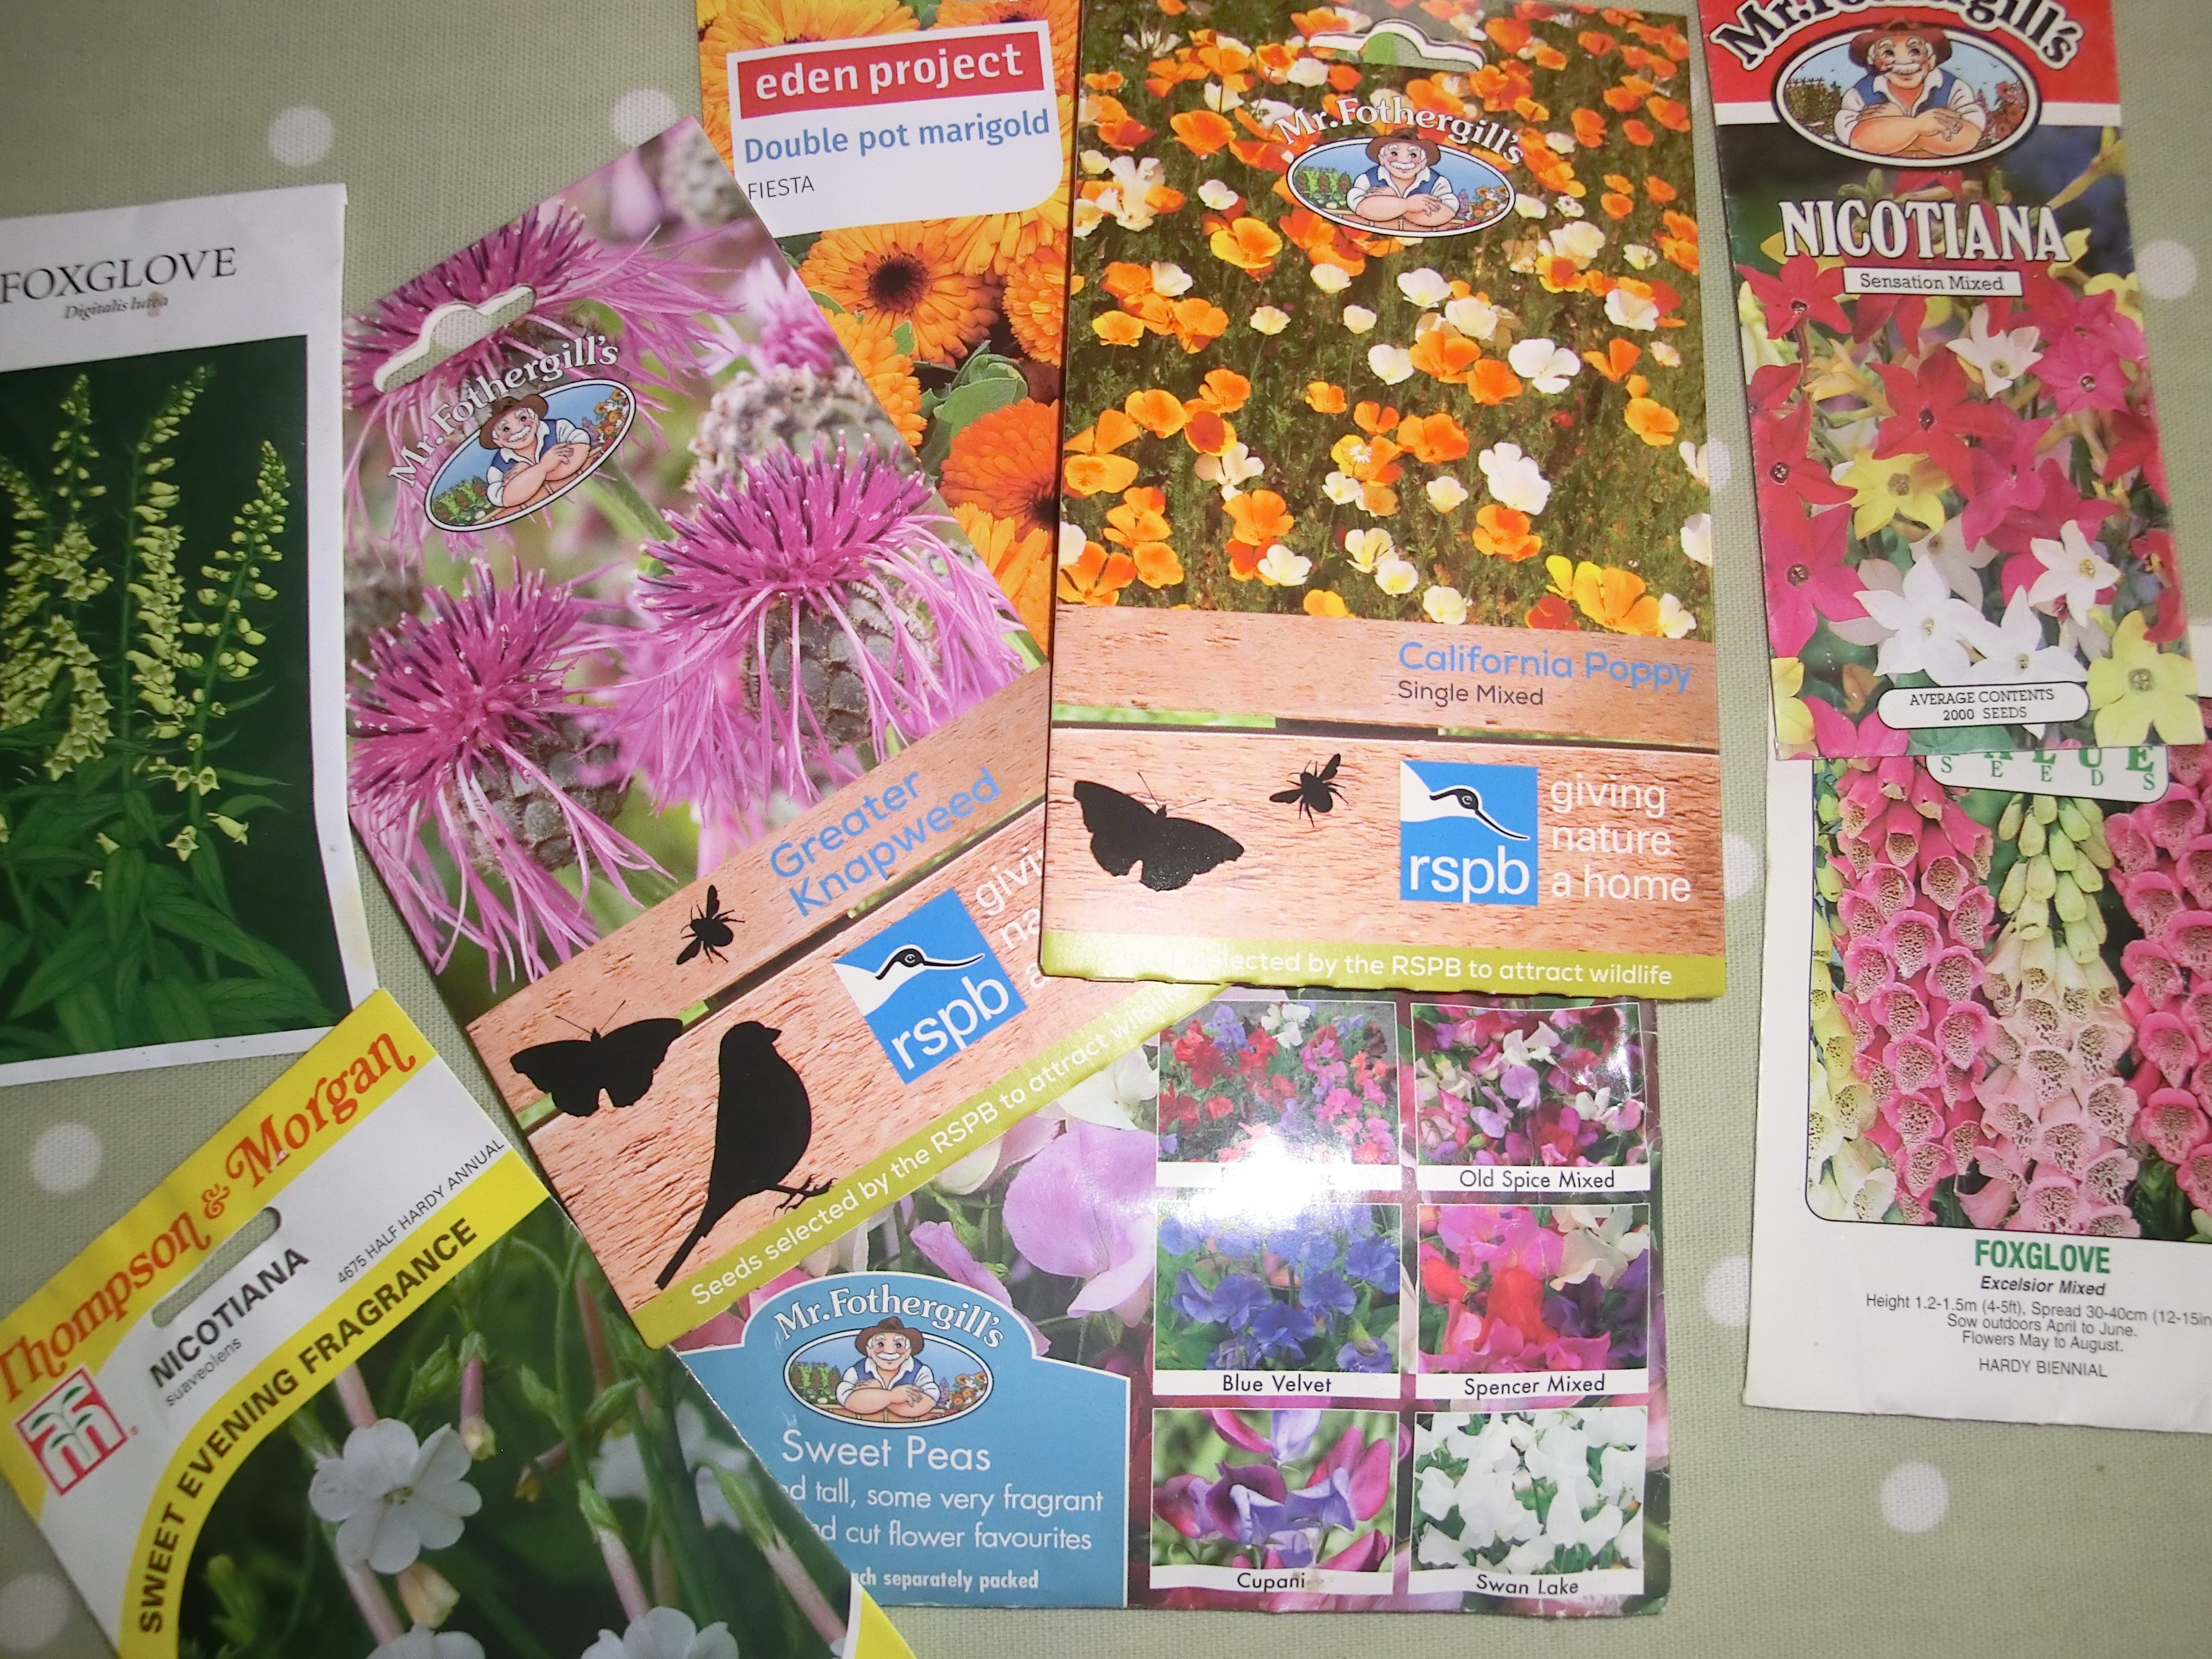 Fill gaps in your garden - sow flower seeds now